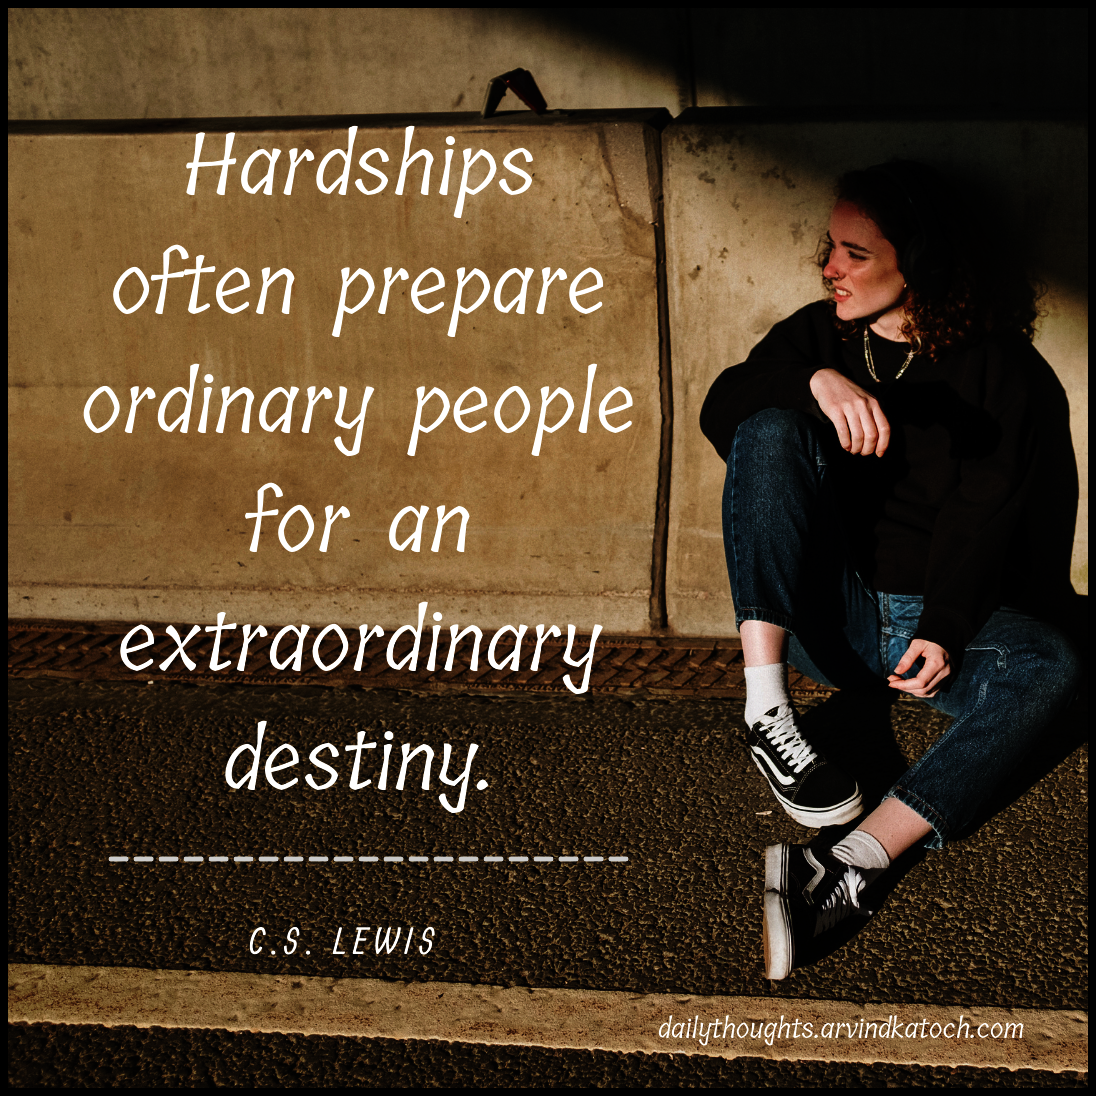 Daily Thought with meaning (Hardships often prepare ordinary people)